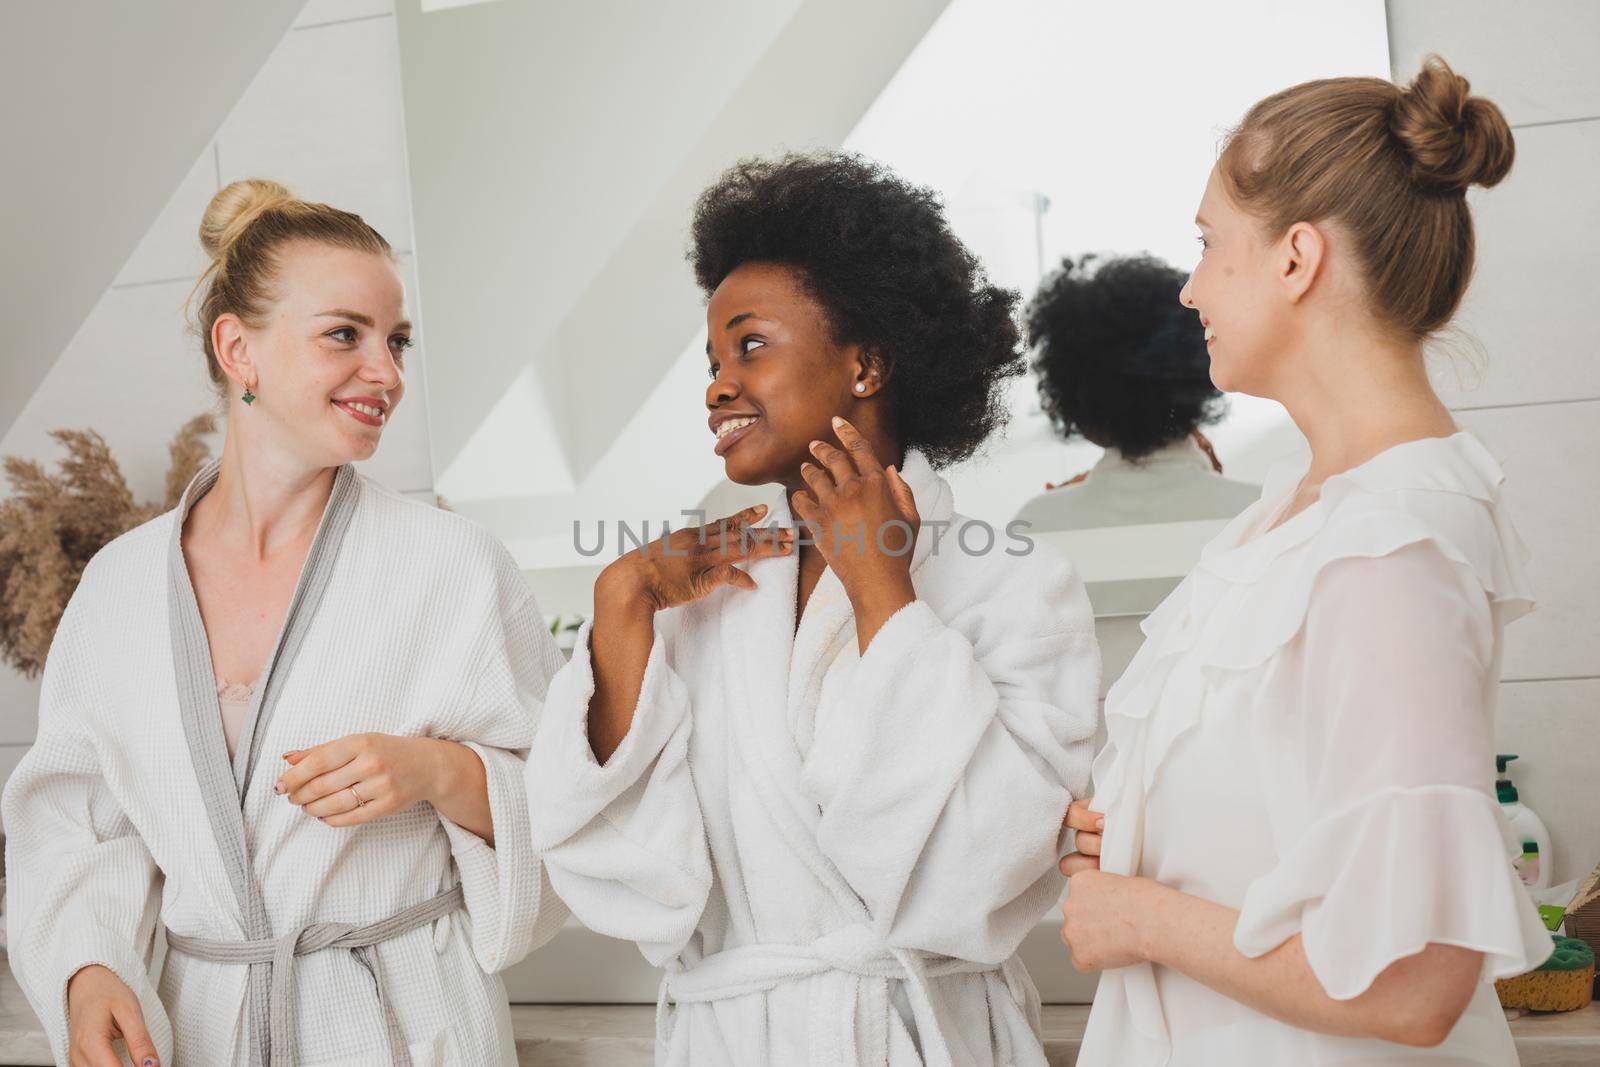 Portrait of three happy young women in bathrobes. They hold facial cleansing tools and look at the camera